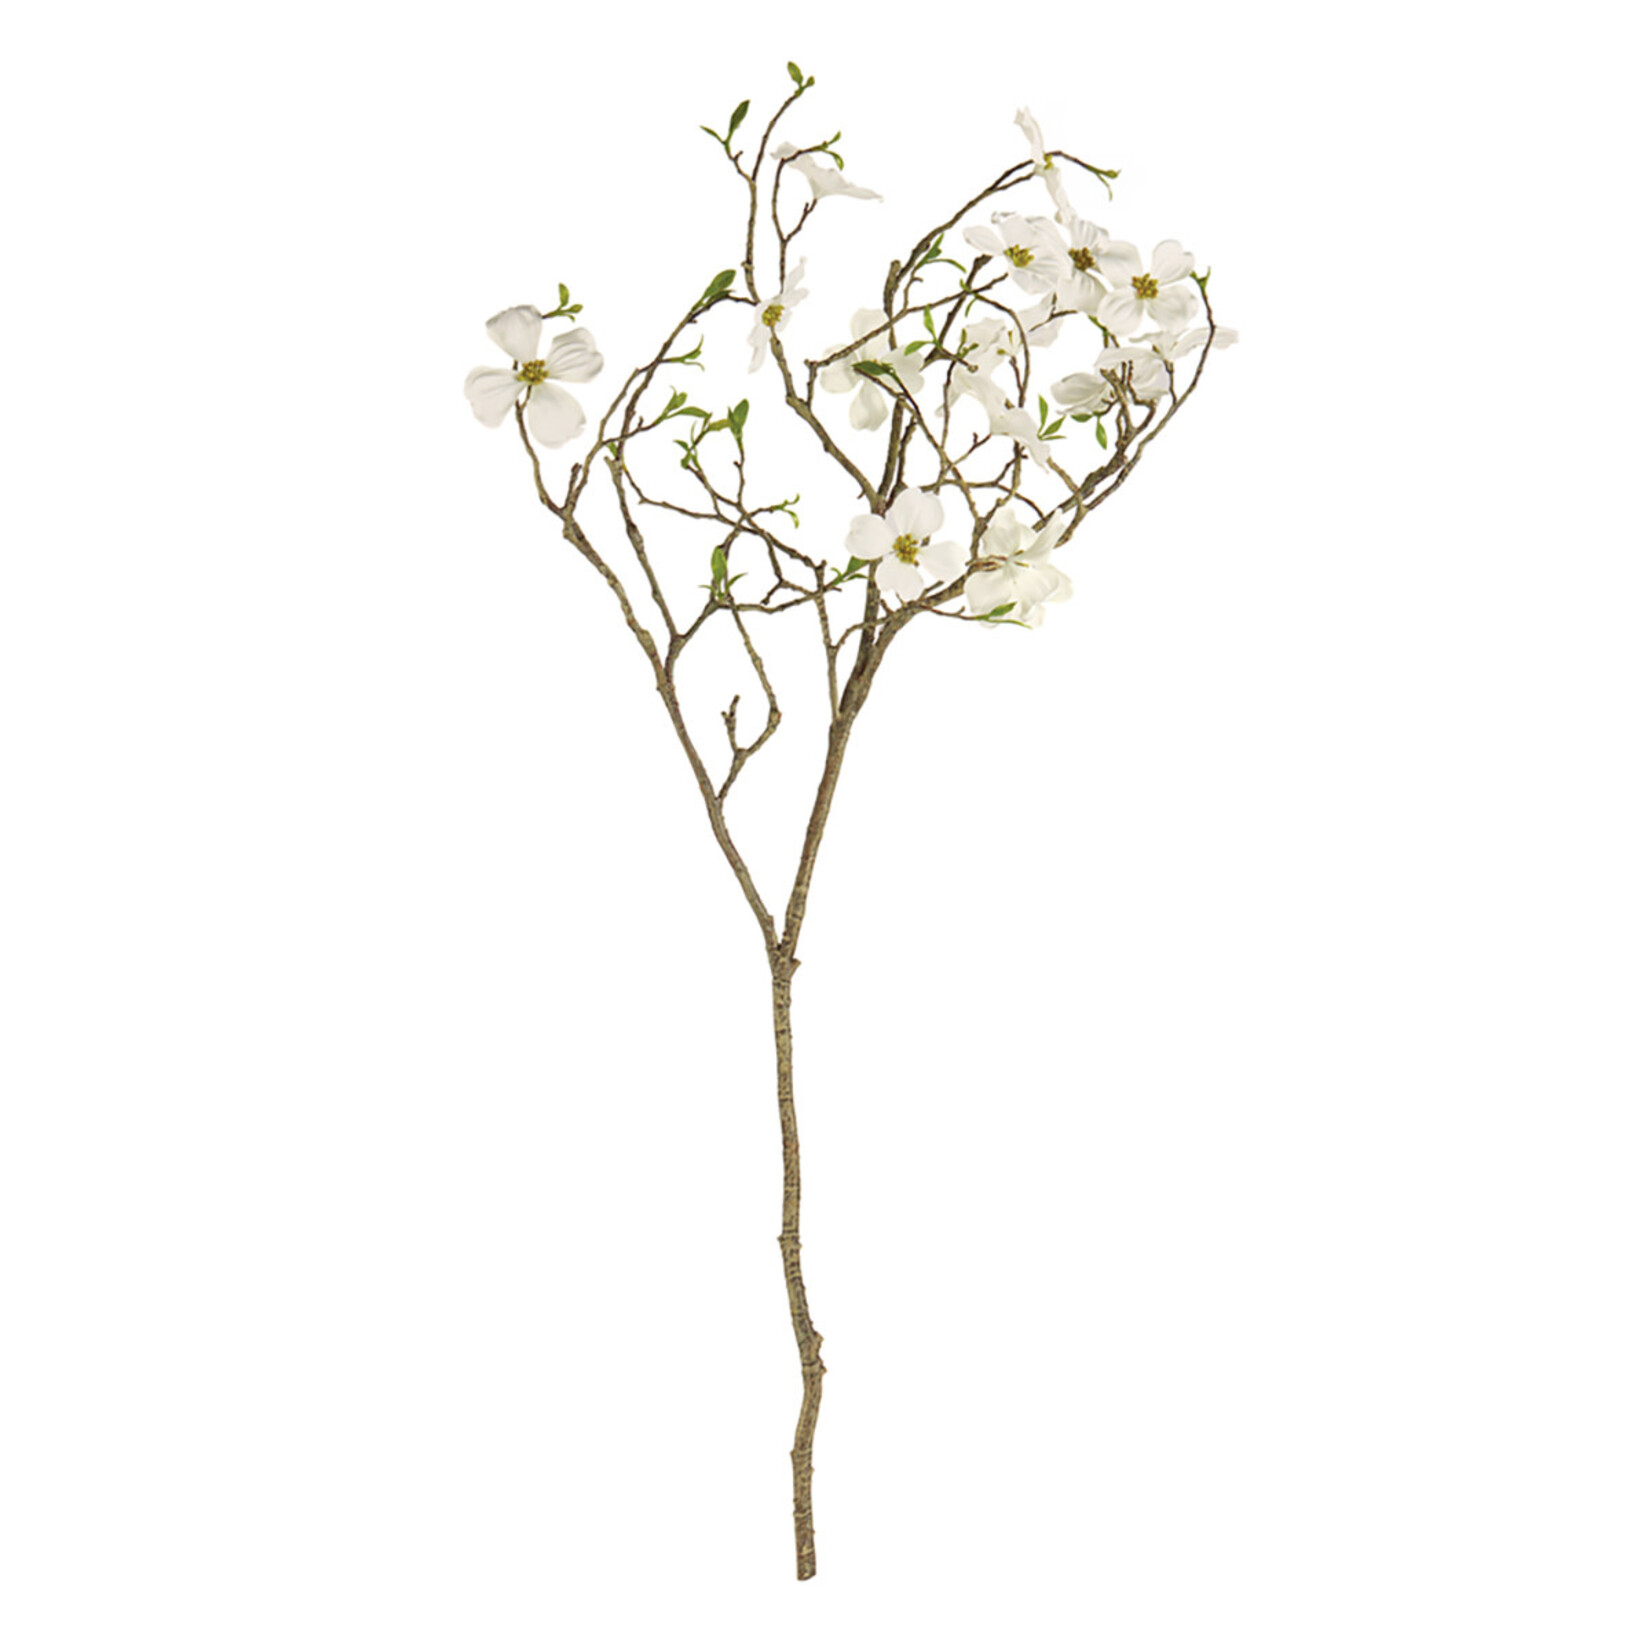 Napa Home and Garden Dogwood Blossom Branch 40"